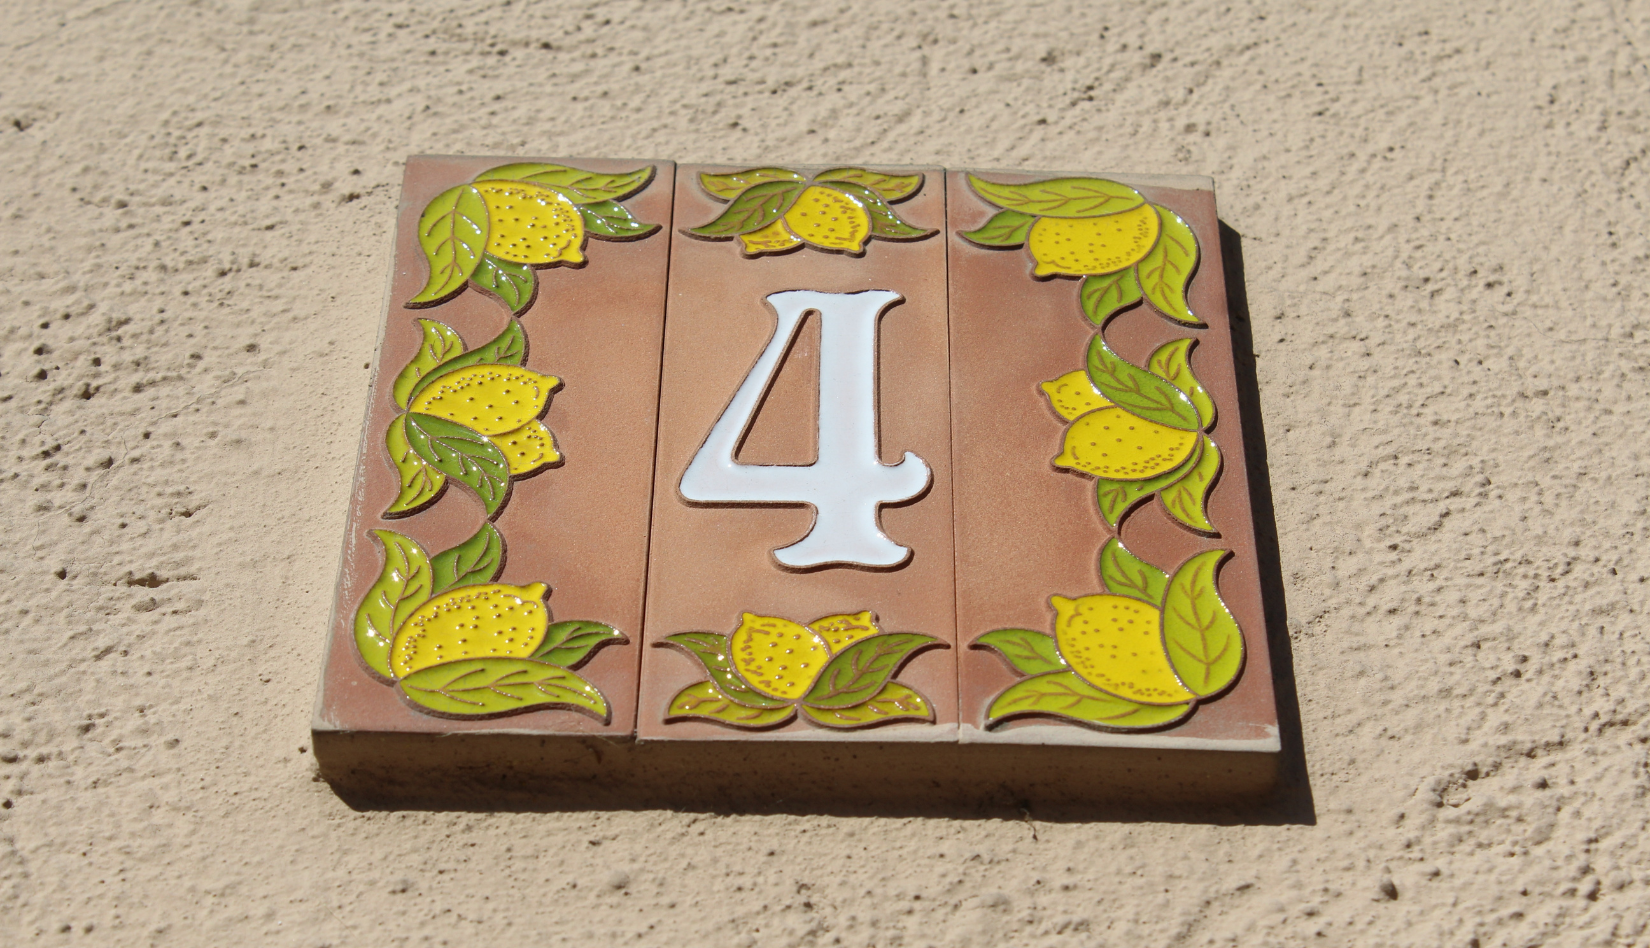 Decorative brick with the number '4' and lemons.